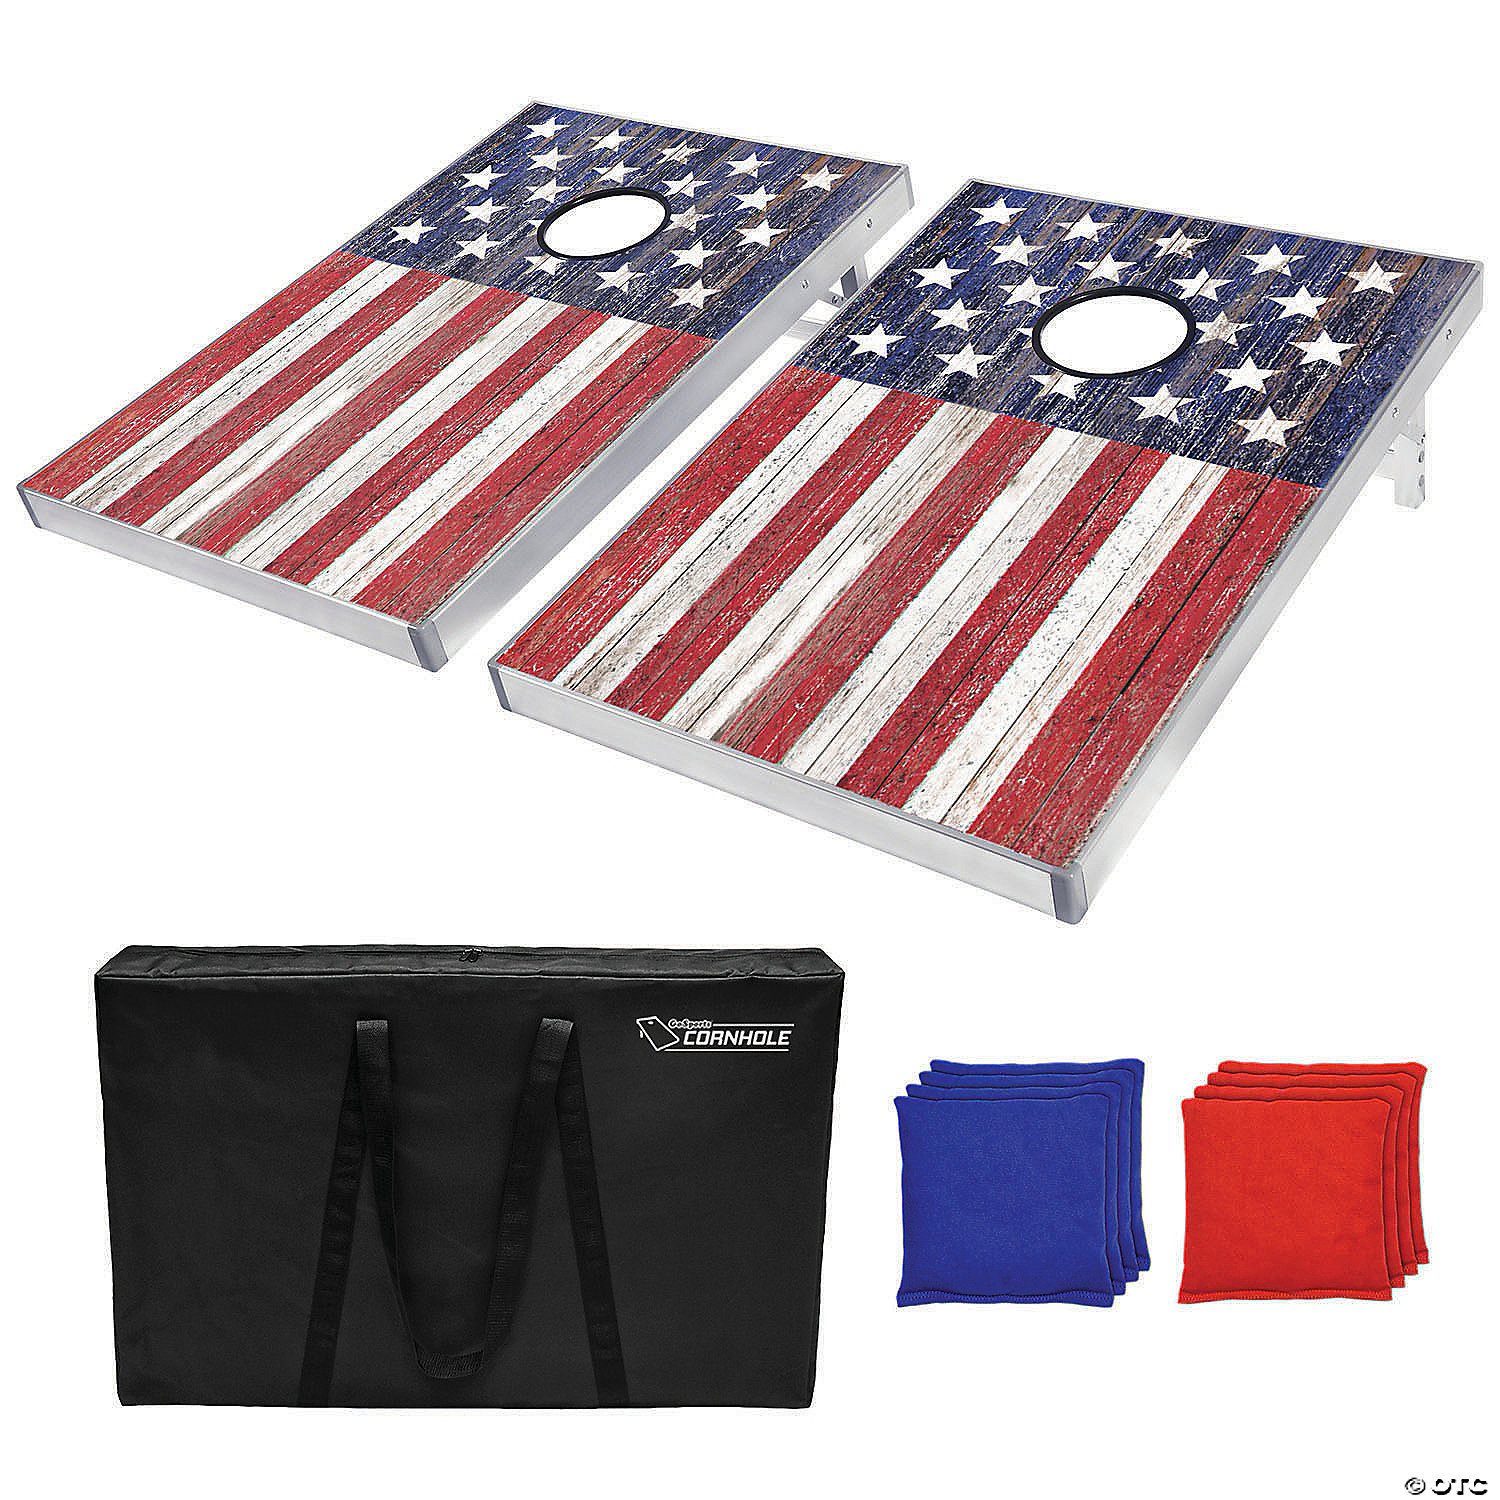 Multicolor One Size Tailgate Toss Bean Bag Game Set 